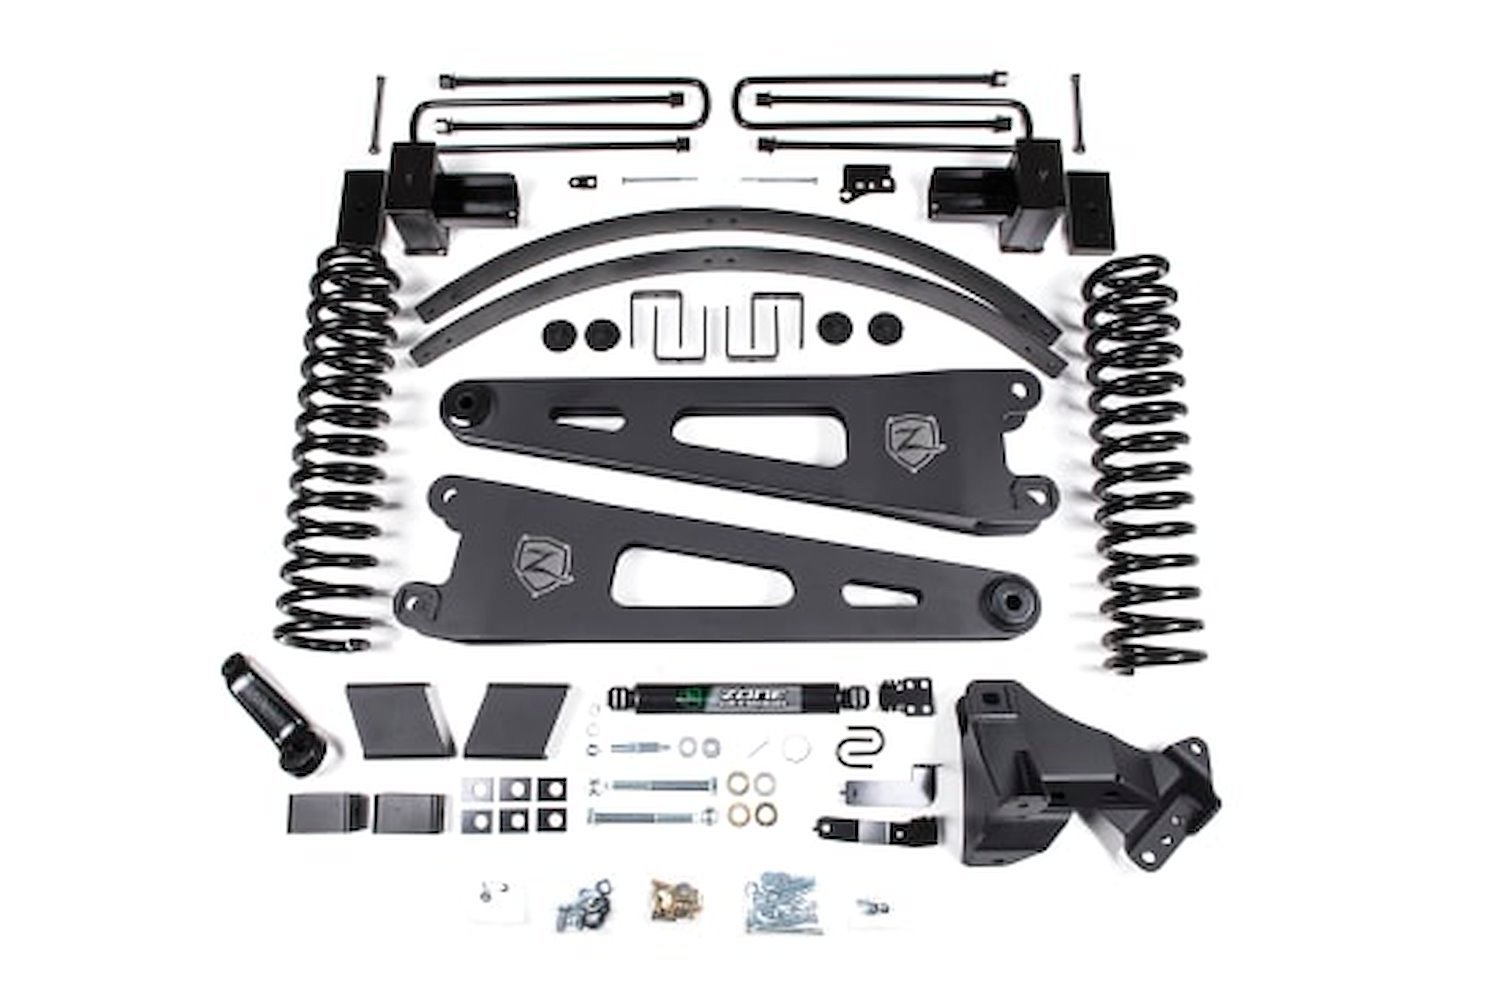 ZONF52F Zone 6" Radius Arm Lift Kit for 2017 Ford F-250/350